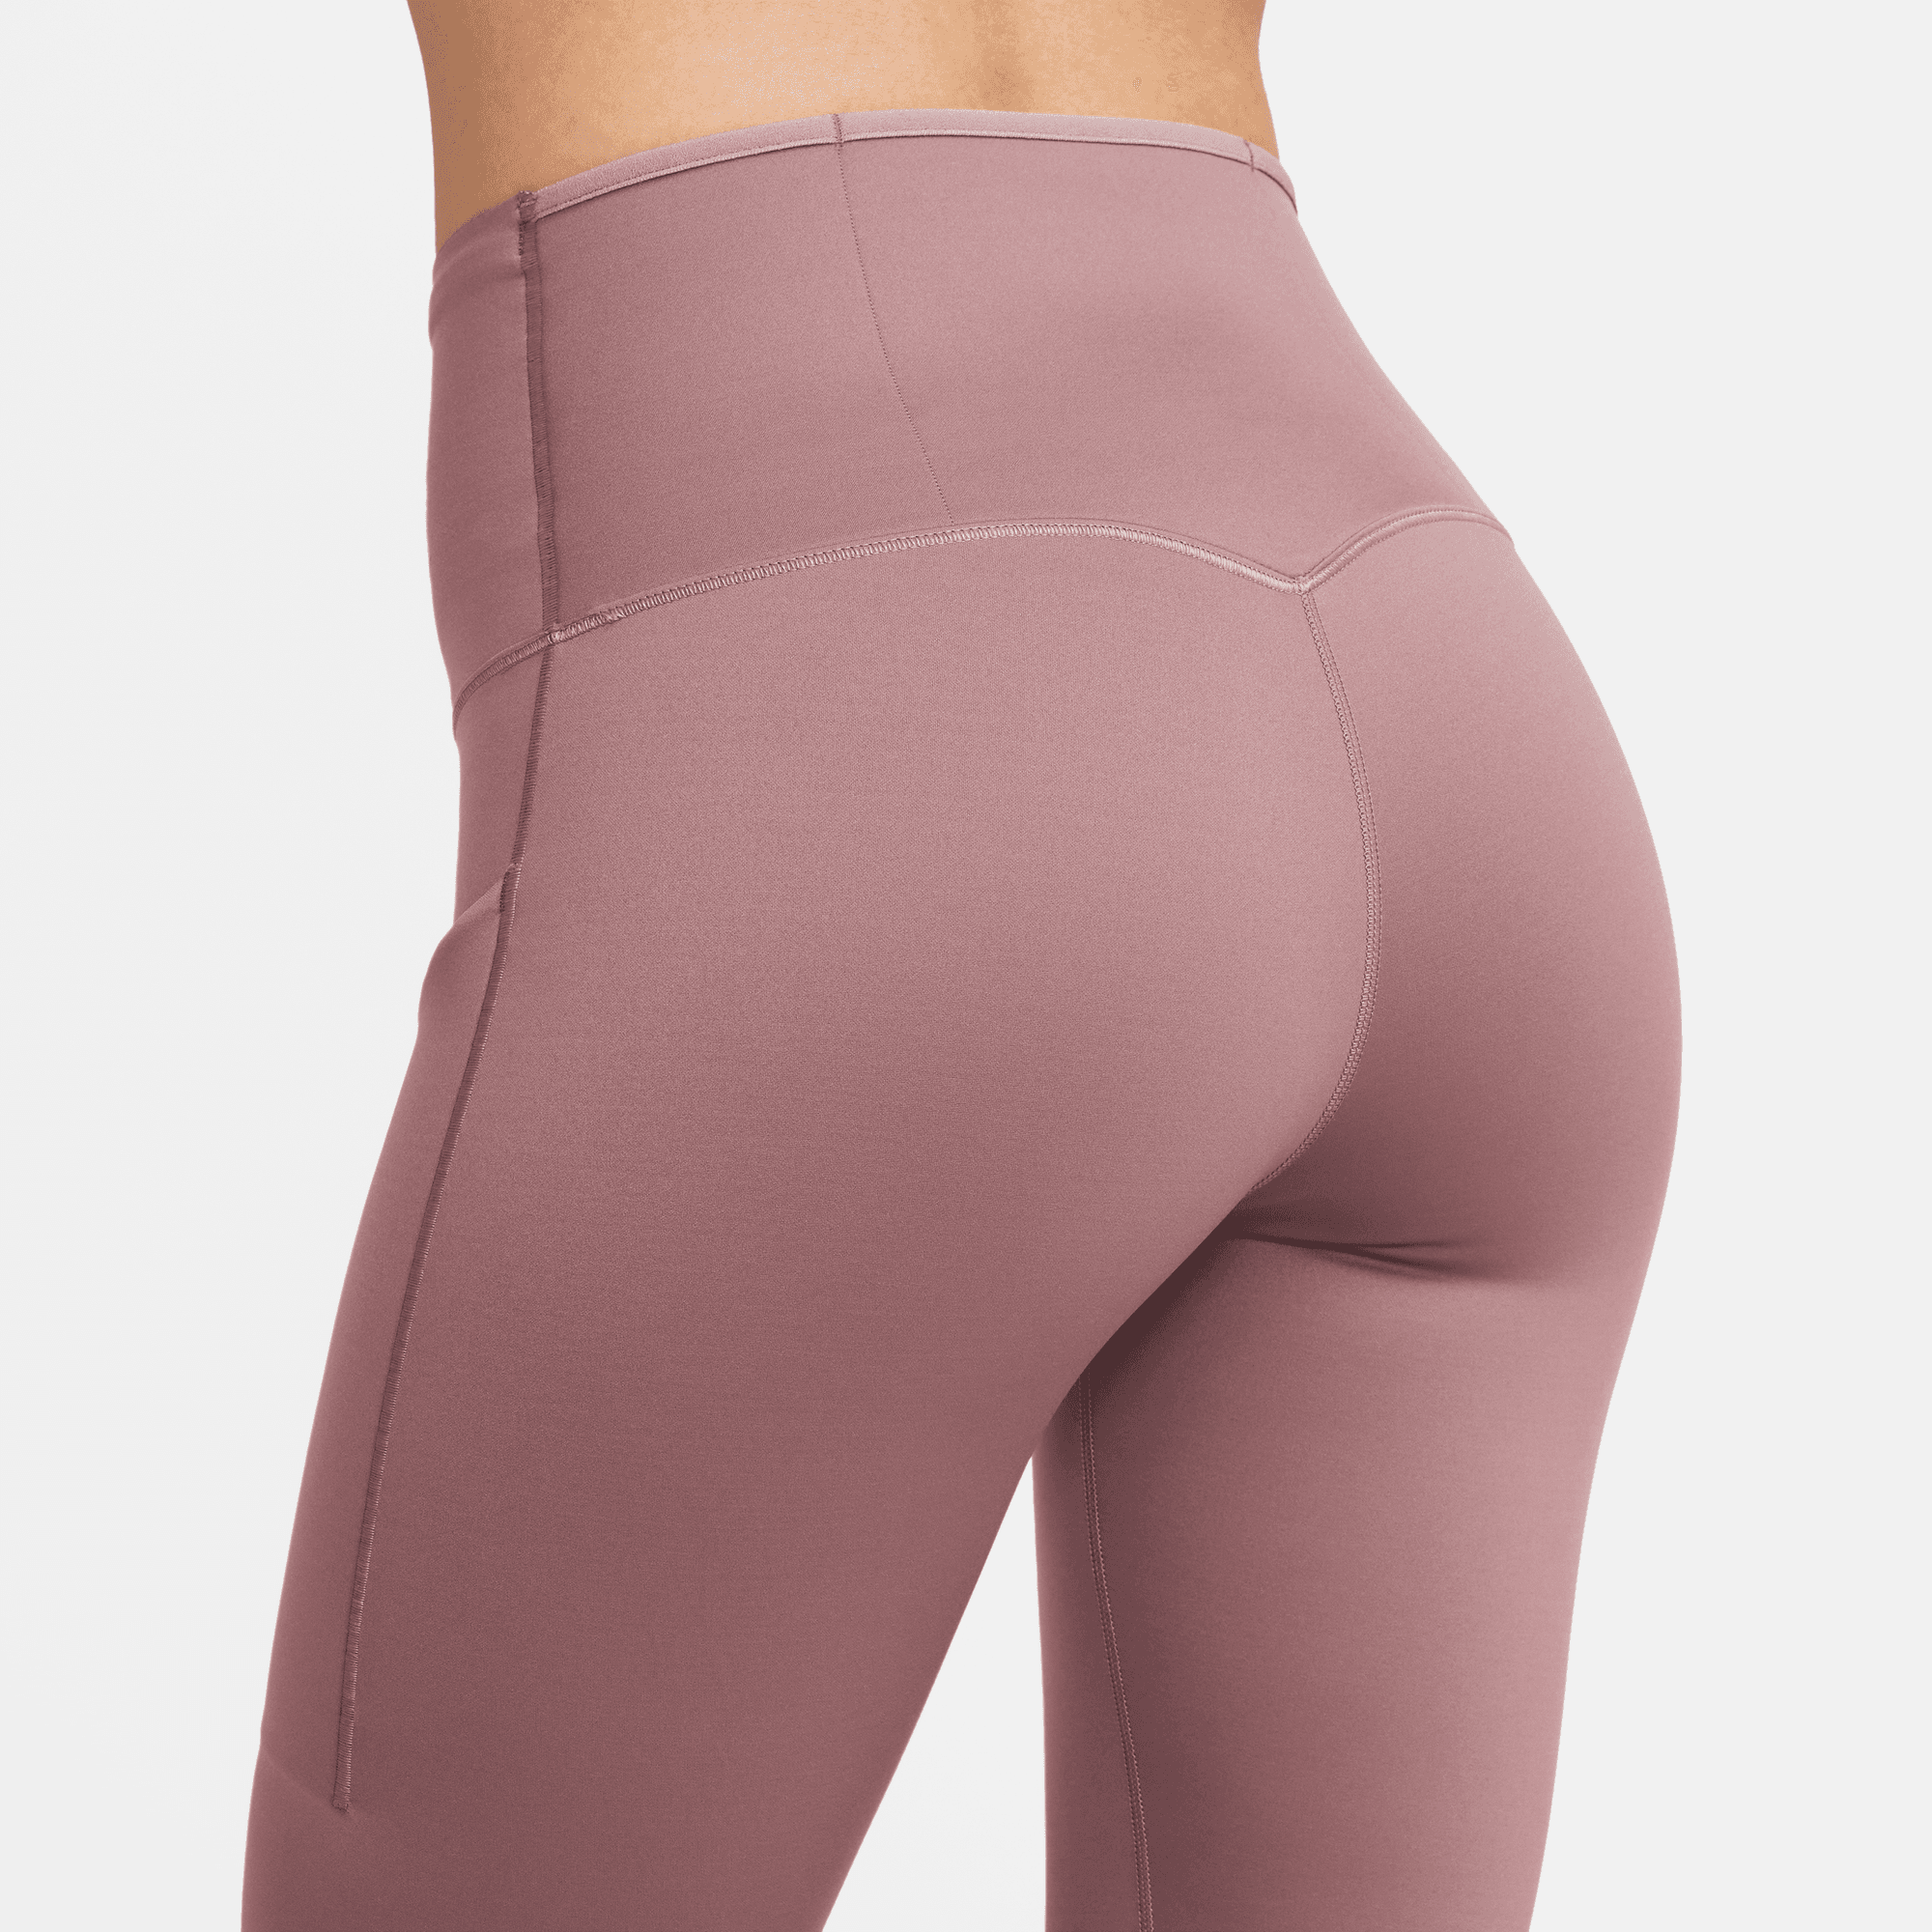 NIKE Go Women's Firm-Support High-Waisted 7/8 Leggings with